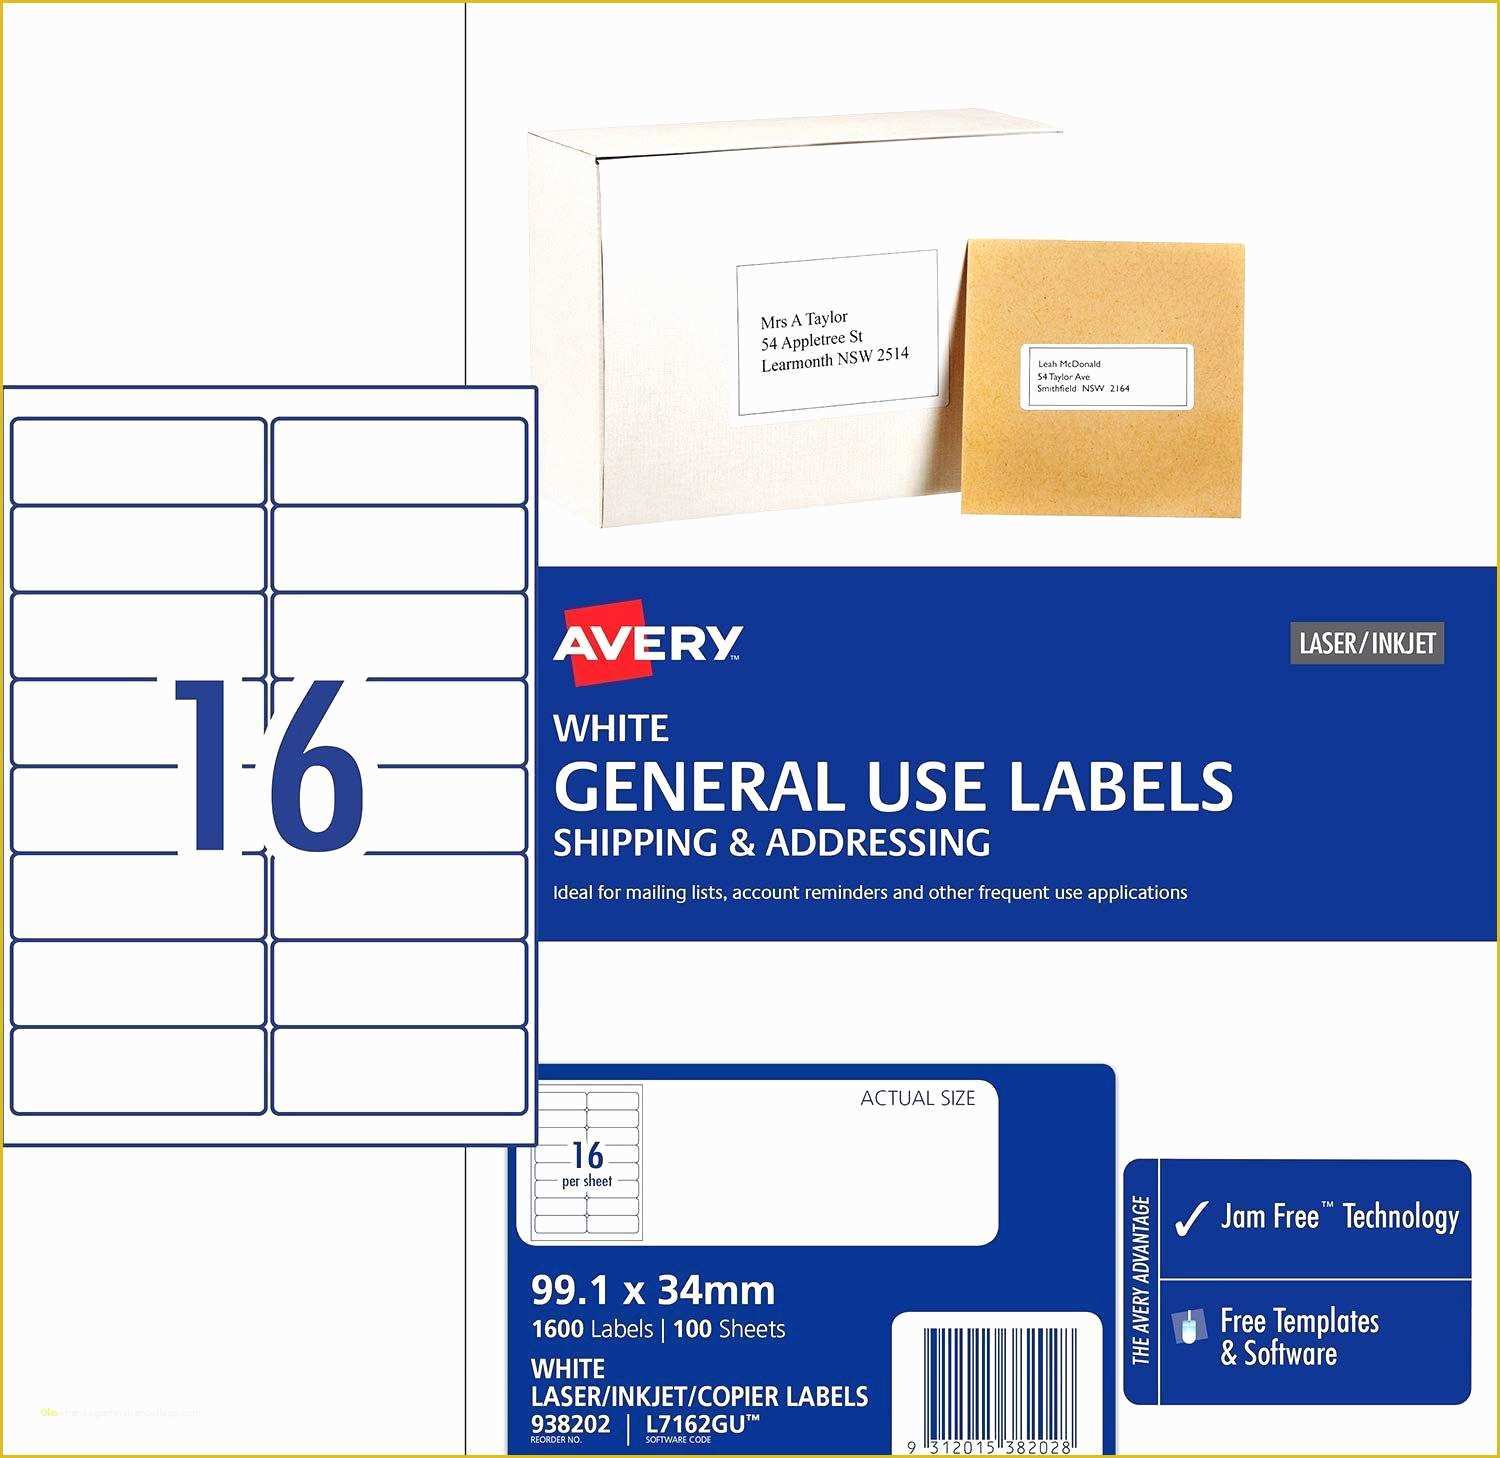 Free Avery Label Templates for Mac Of Address Label Template for Mac Free